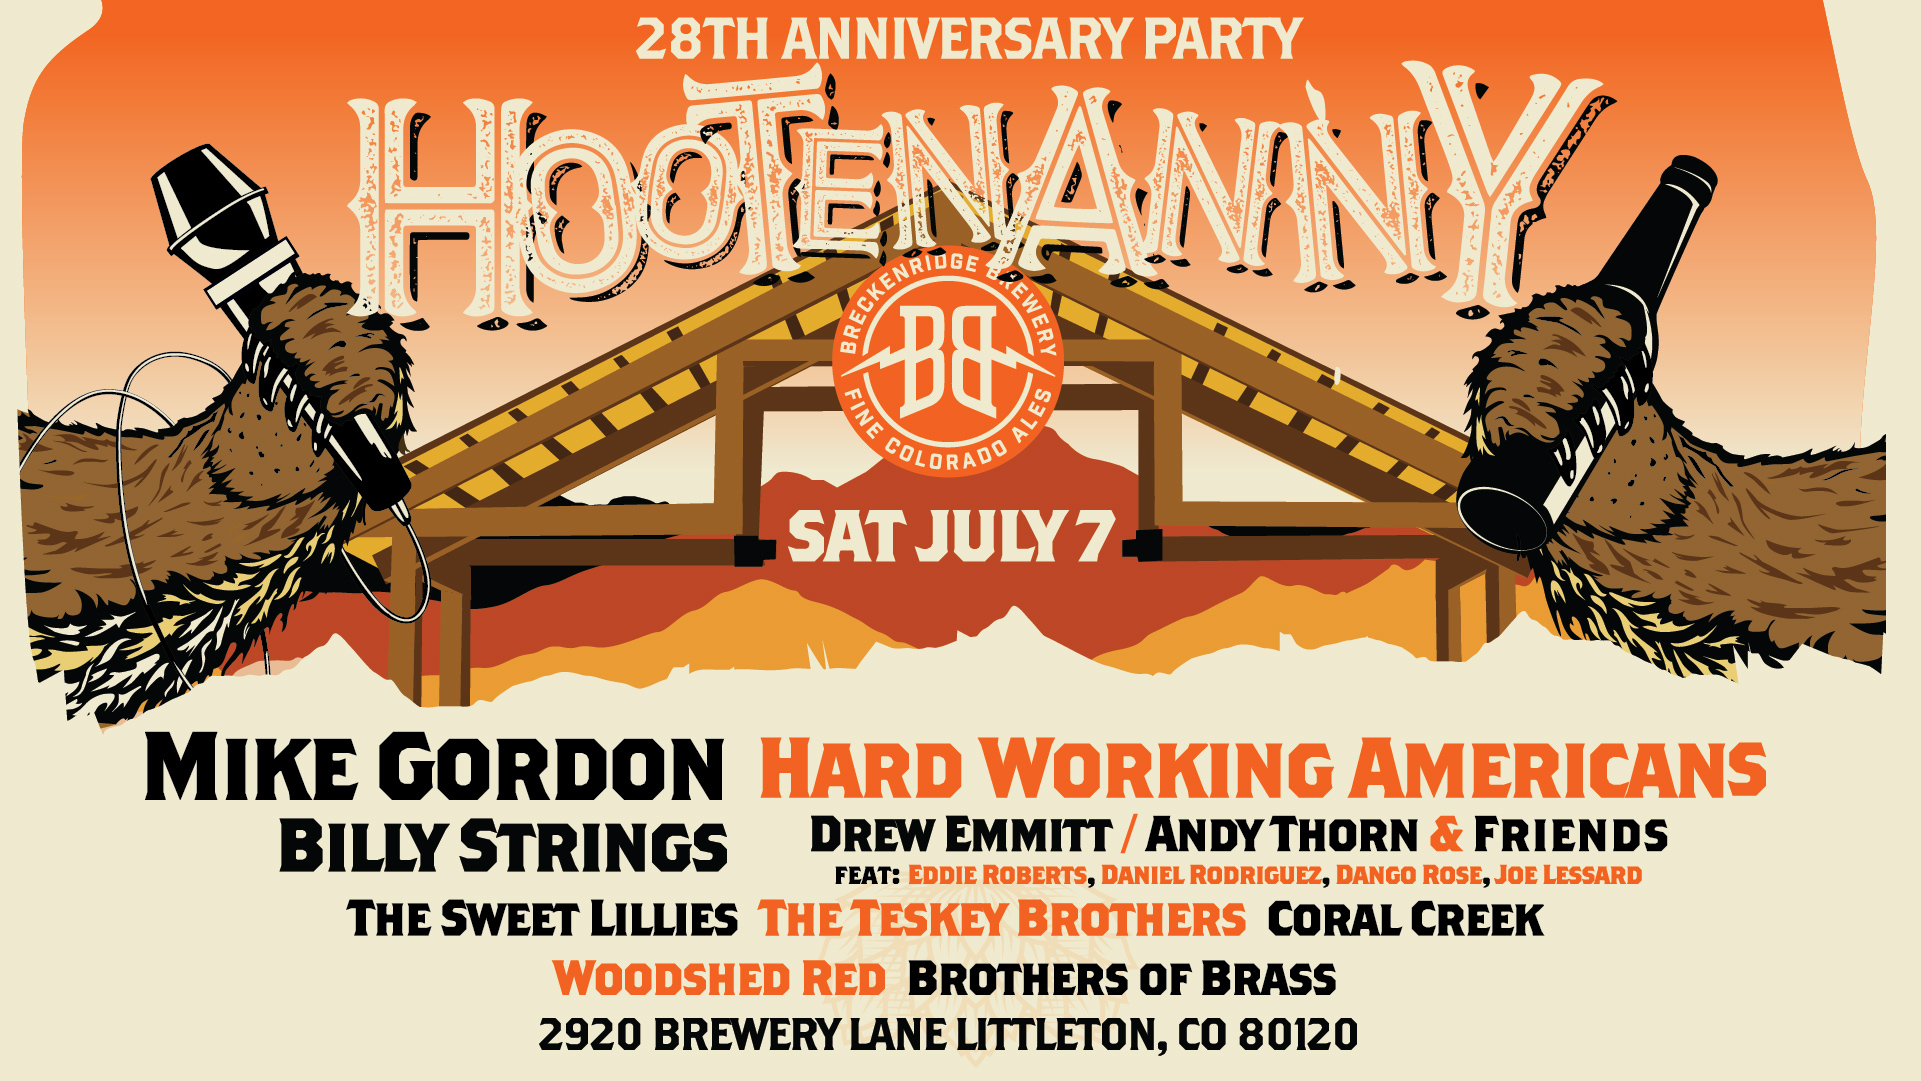 Hootenanny 2018 ft. Mike Gordon, Hard Working Americans, Billy Strings, and More